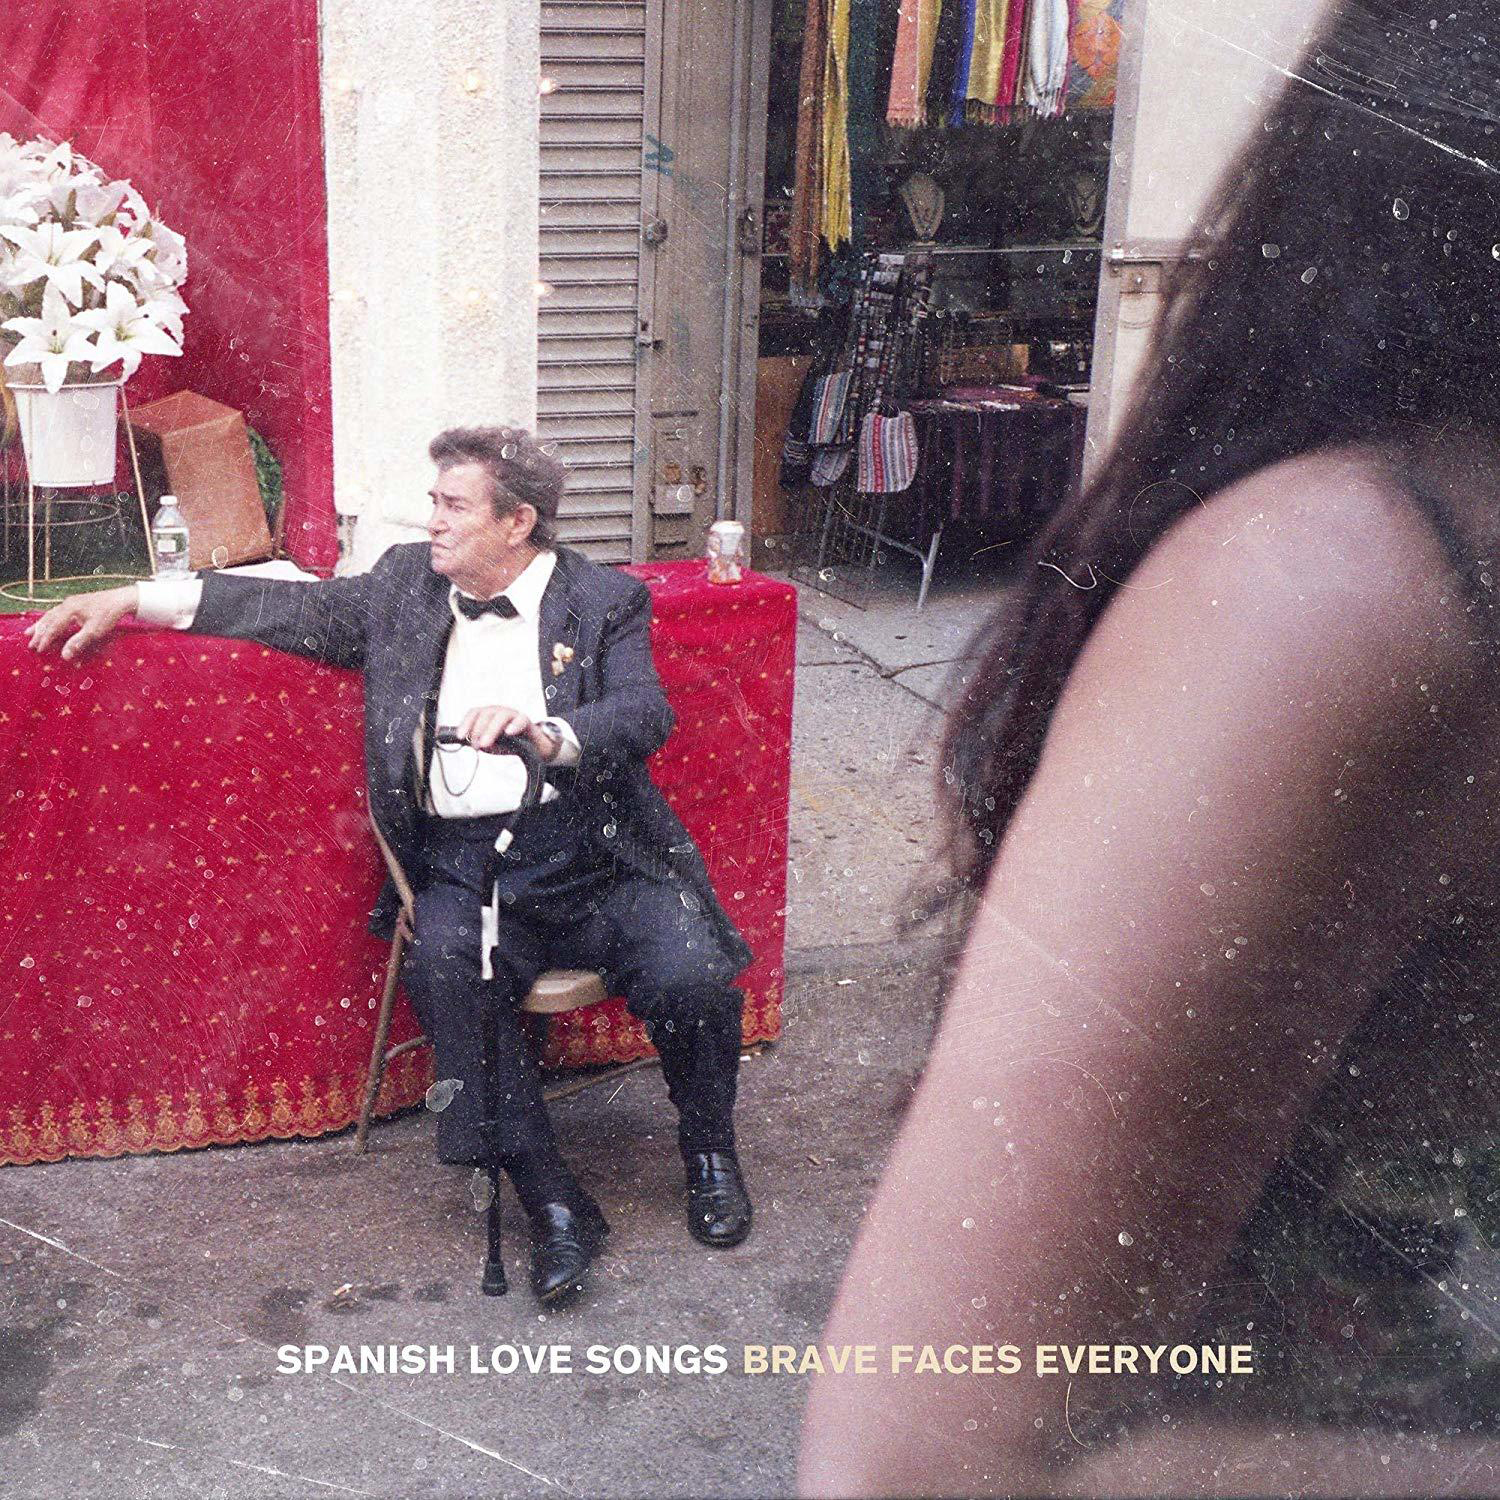 BRAVE FACES - Love - Spanish (CD) Songs EVERYONE